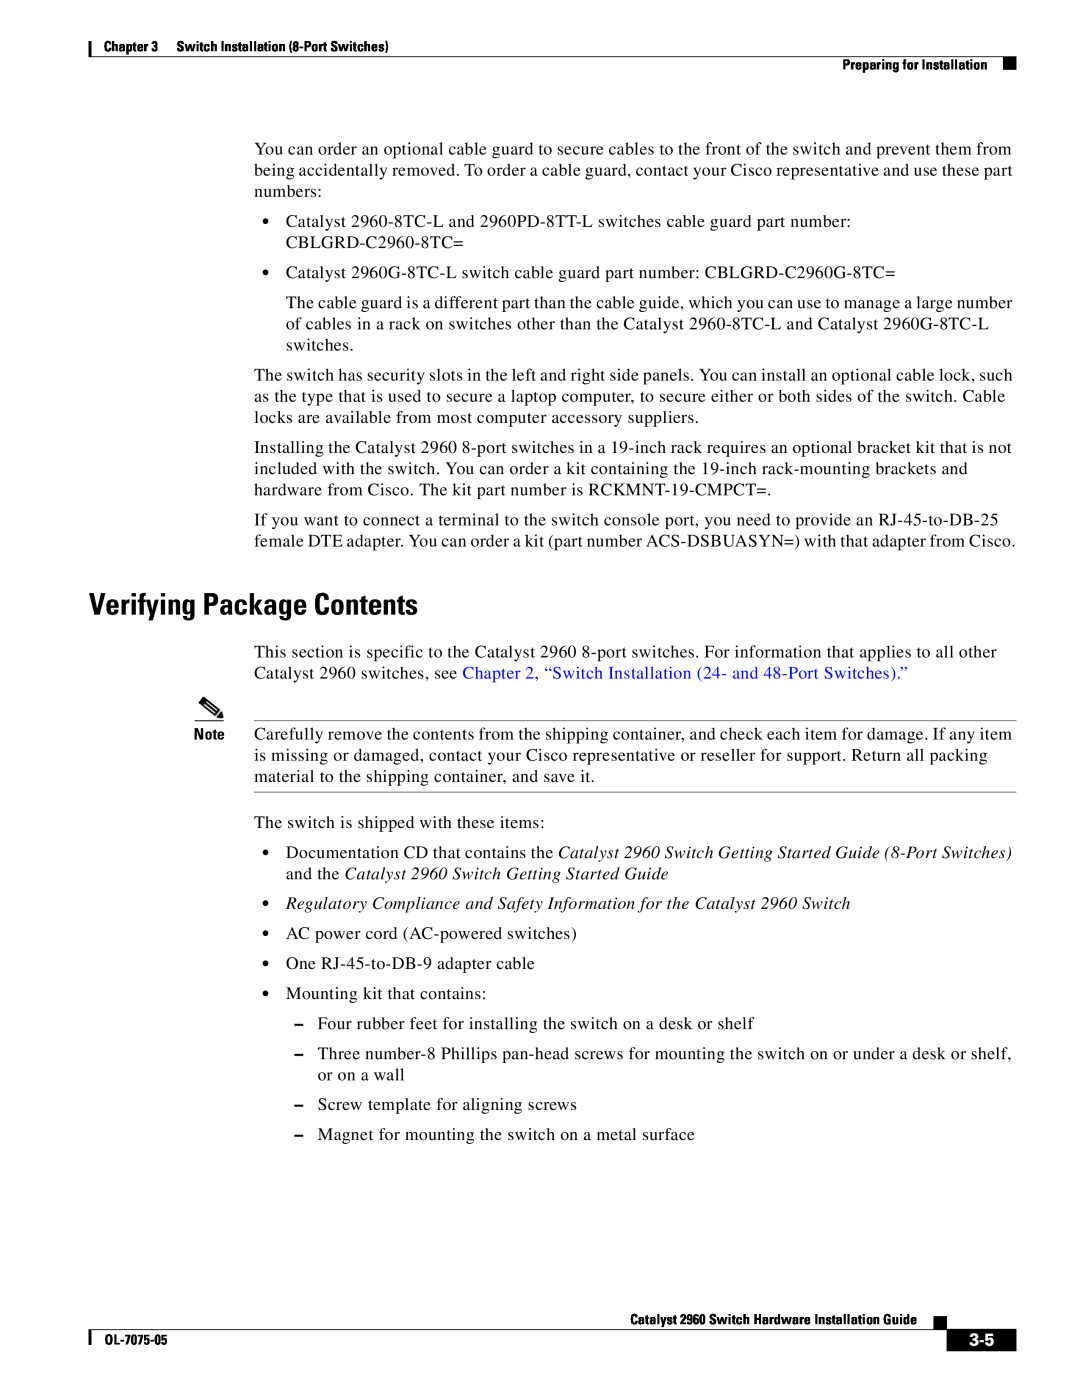 Cisco Systems 2960 specifications Verifying Package Contents 